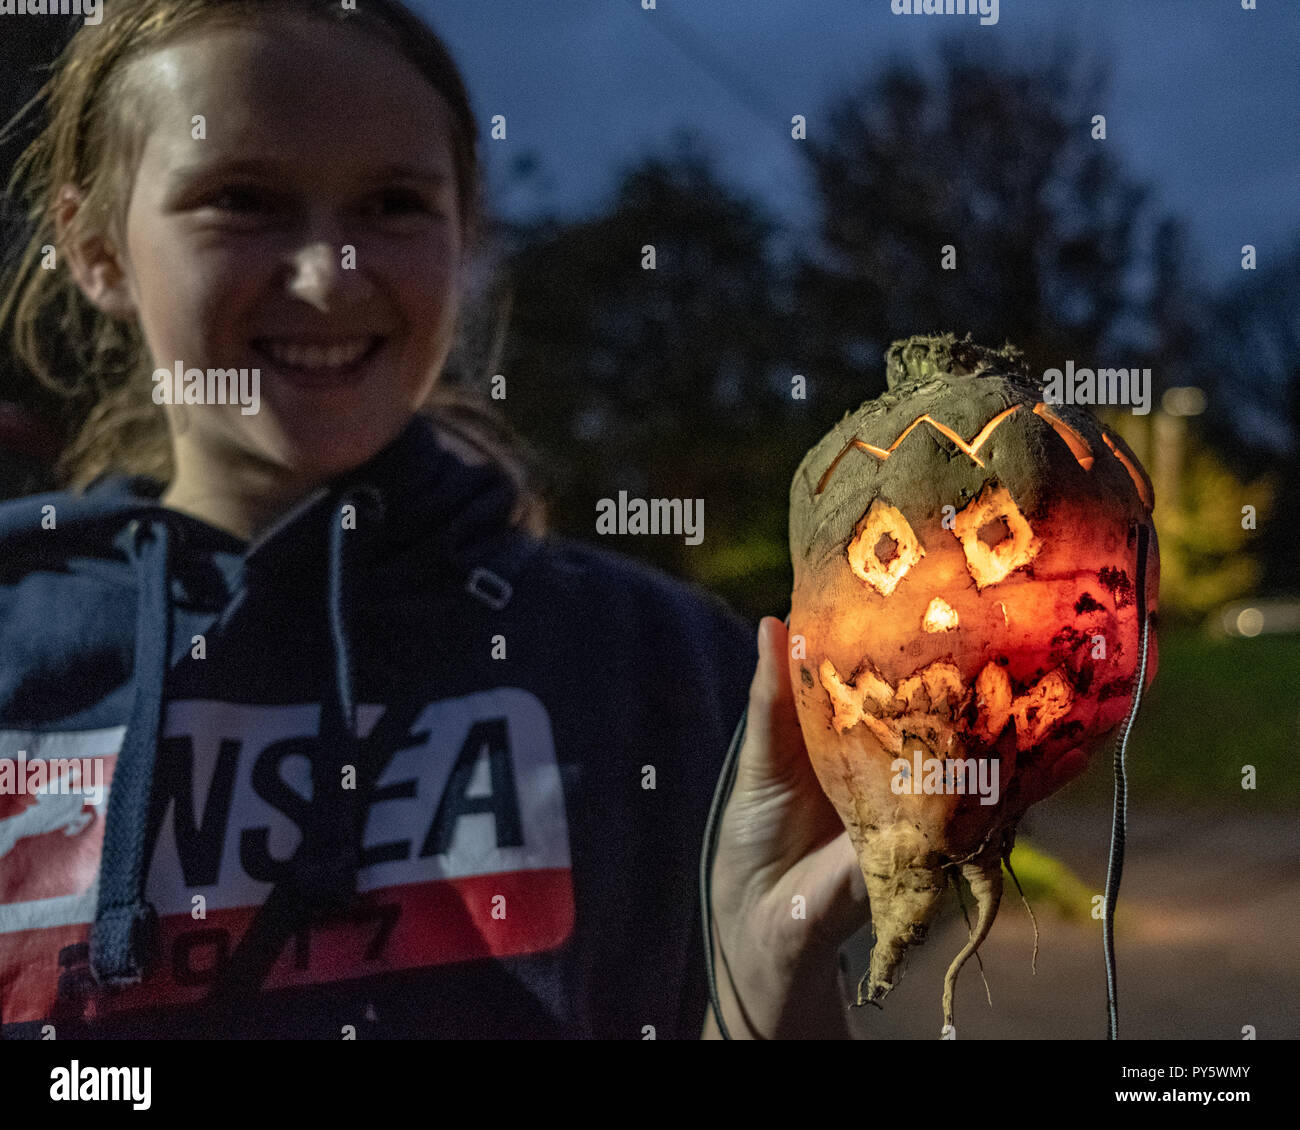 Hinton St George, Somerset, UK - 25 October 2018.  A young woman holds a 'Punkie' during the annual 'punkie night' procession around Hinton St George village. A 'Punkie' is a hollowed out mangold or mangle-wrurzel with a lit candle inside to make a lantern. Although the origins of the custom are obscure legend has it that the wives of Hinton St George went to met their husbands as they came back from the Chiselbrough Fair, held on the last Thursday in October. They made lanterns out of hollowed out mangle-wurzels to light their way. Credit: Tom Corban/Alamy Live News Stock Photo